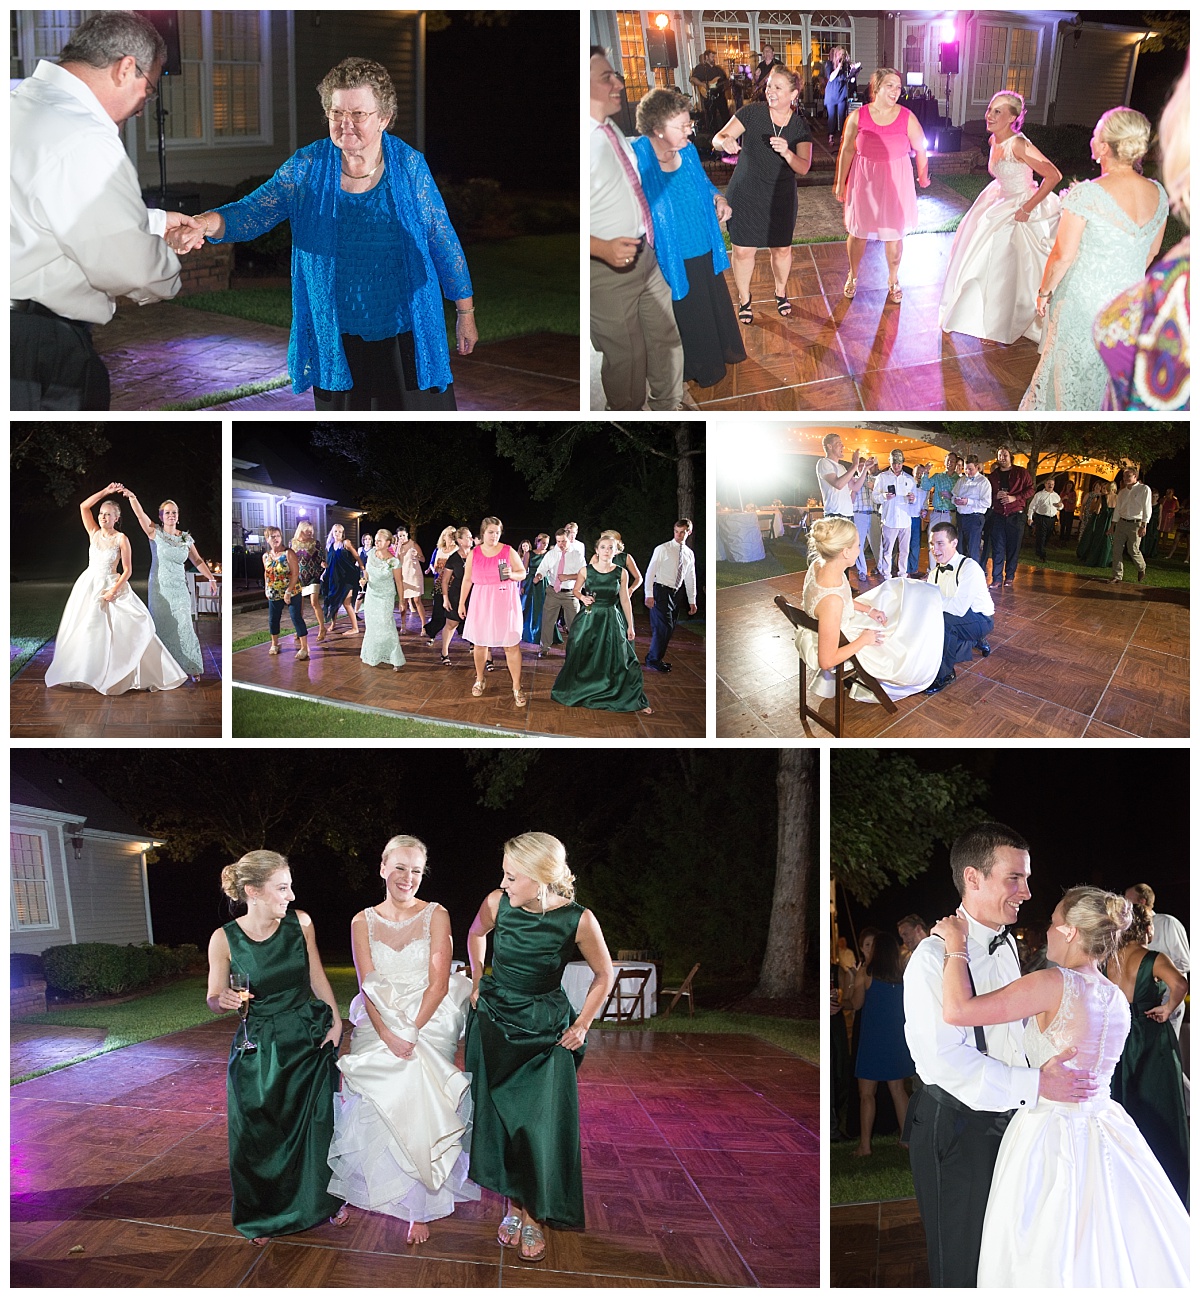 Dancing at the outdoor wedding reception